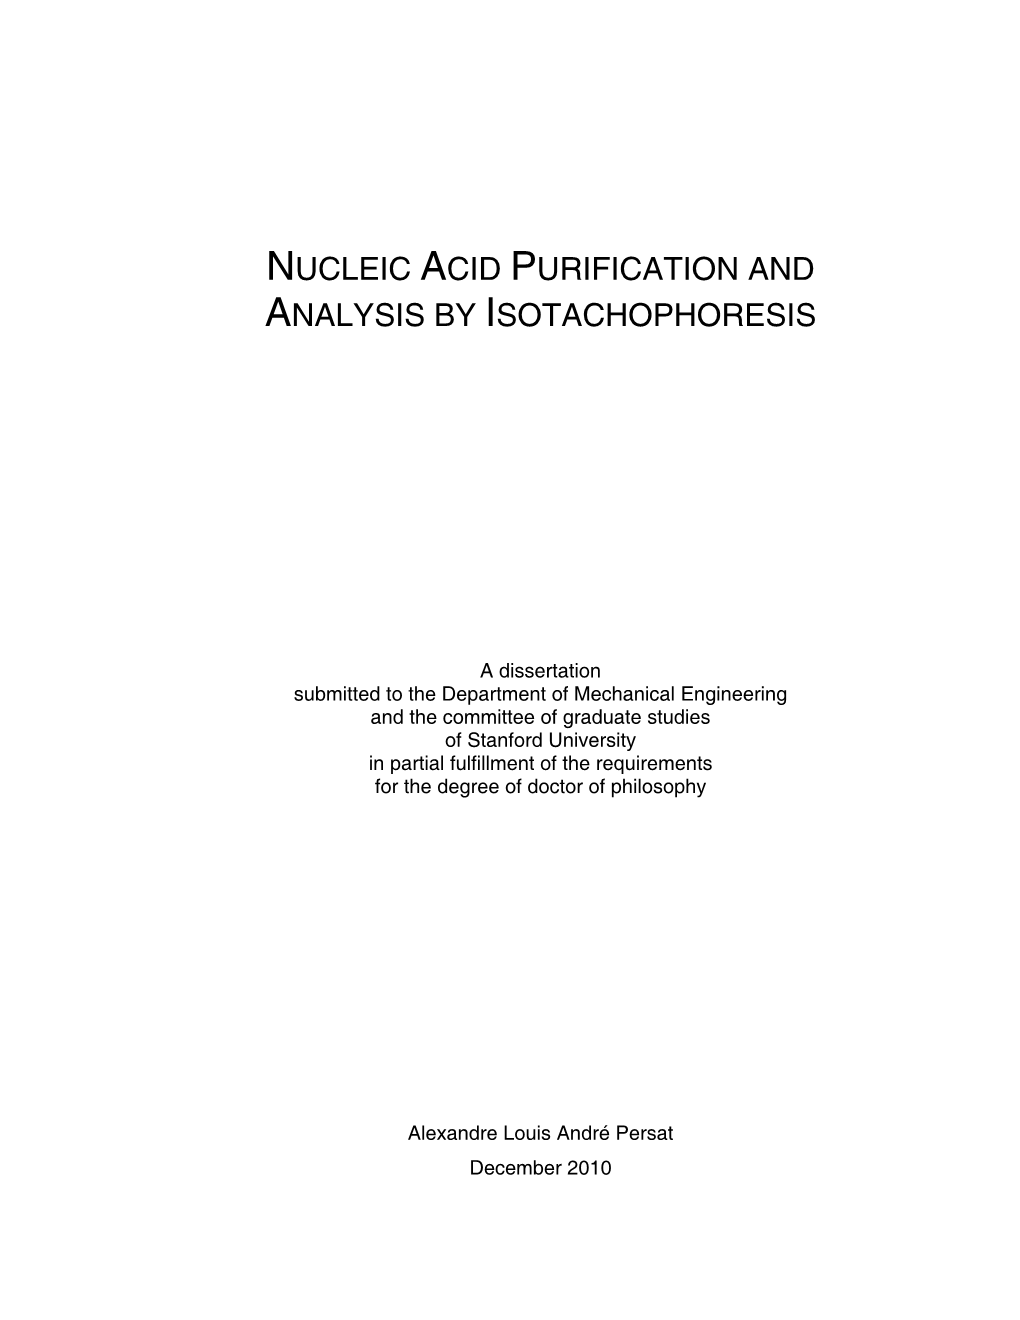 Nucleic Acid Purification and Analysis by Isotachophoresis